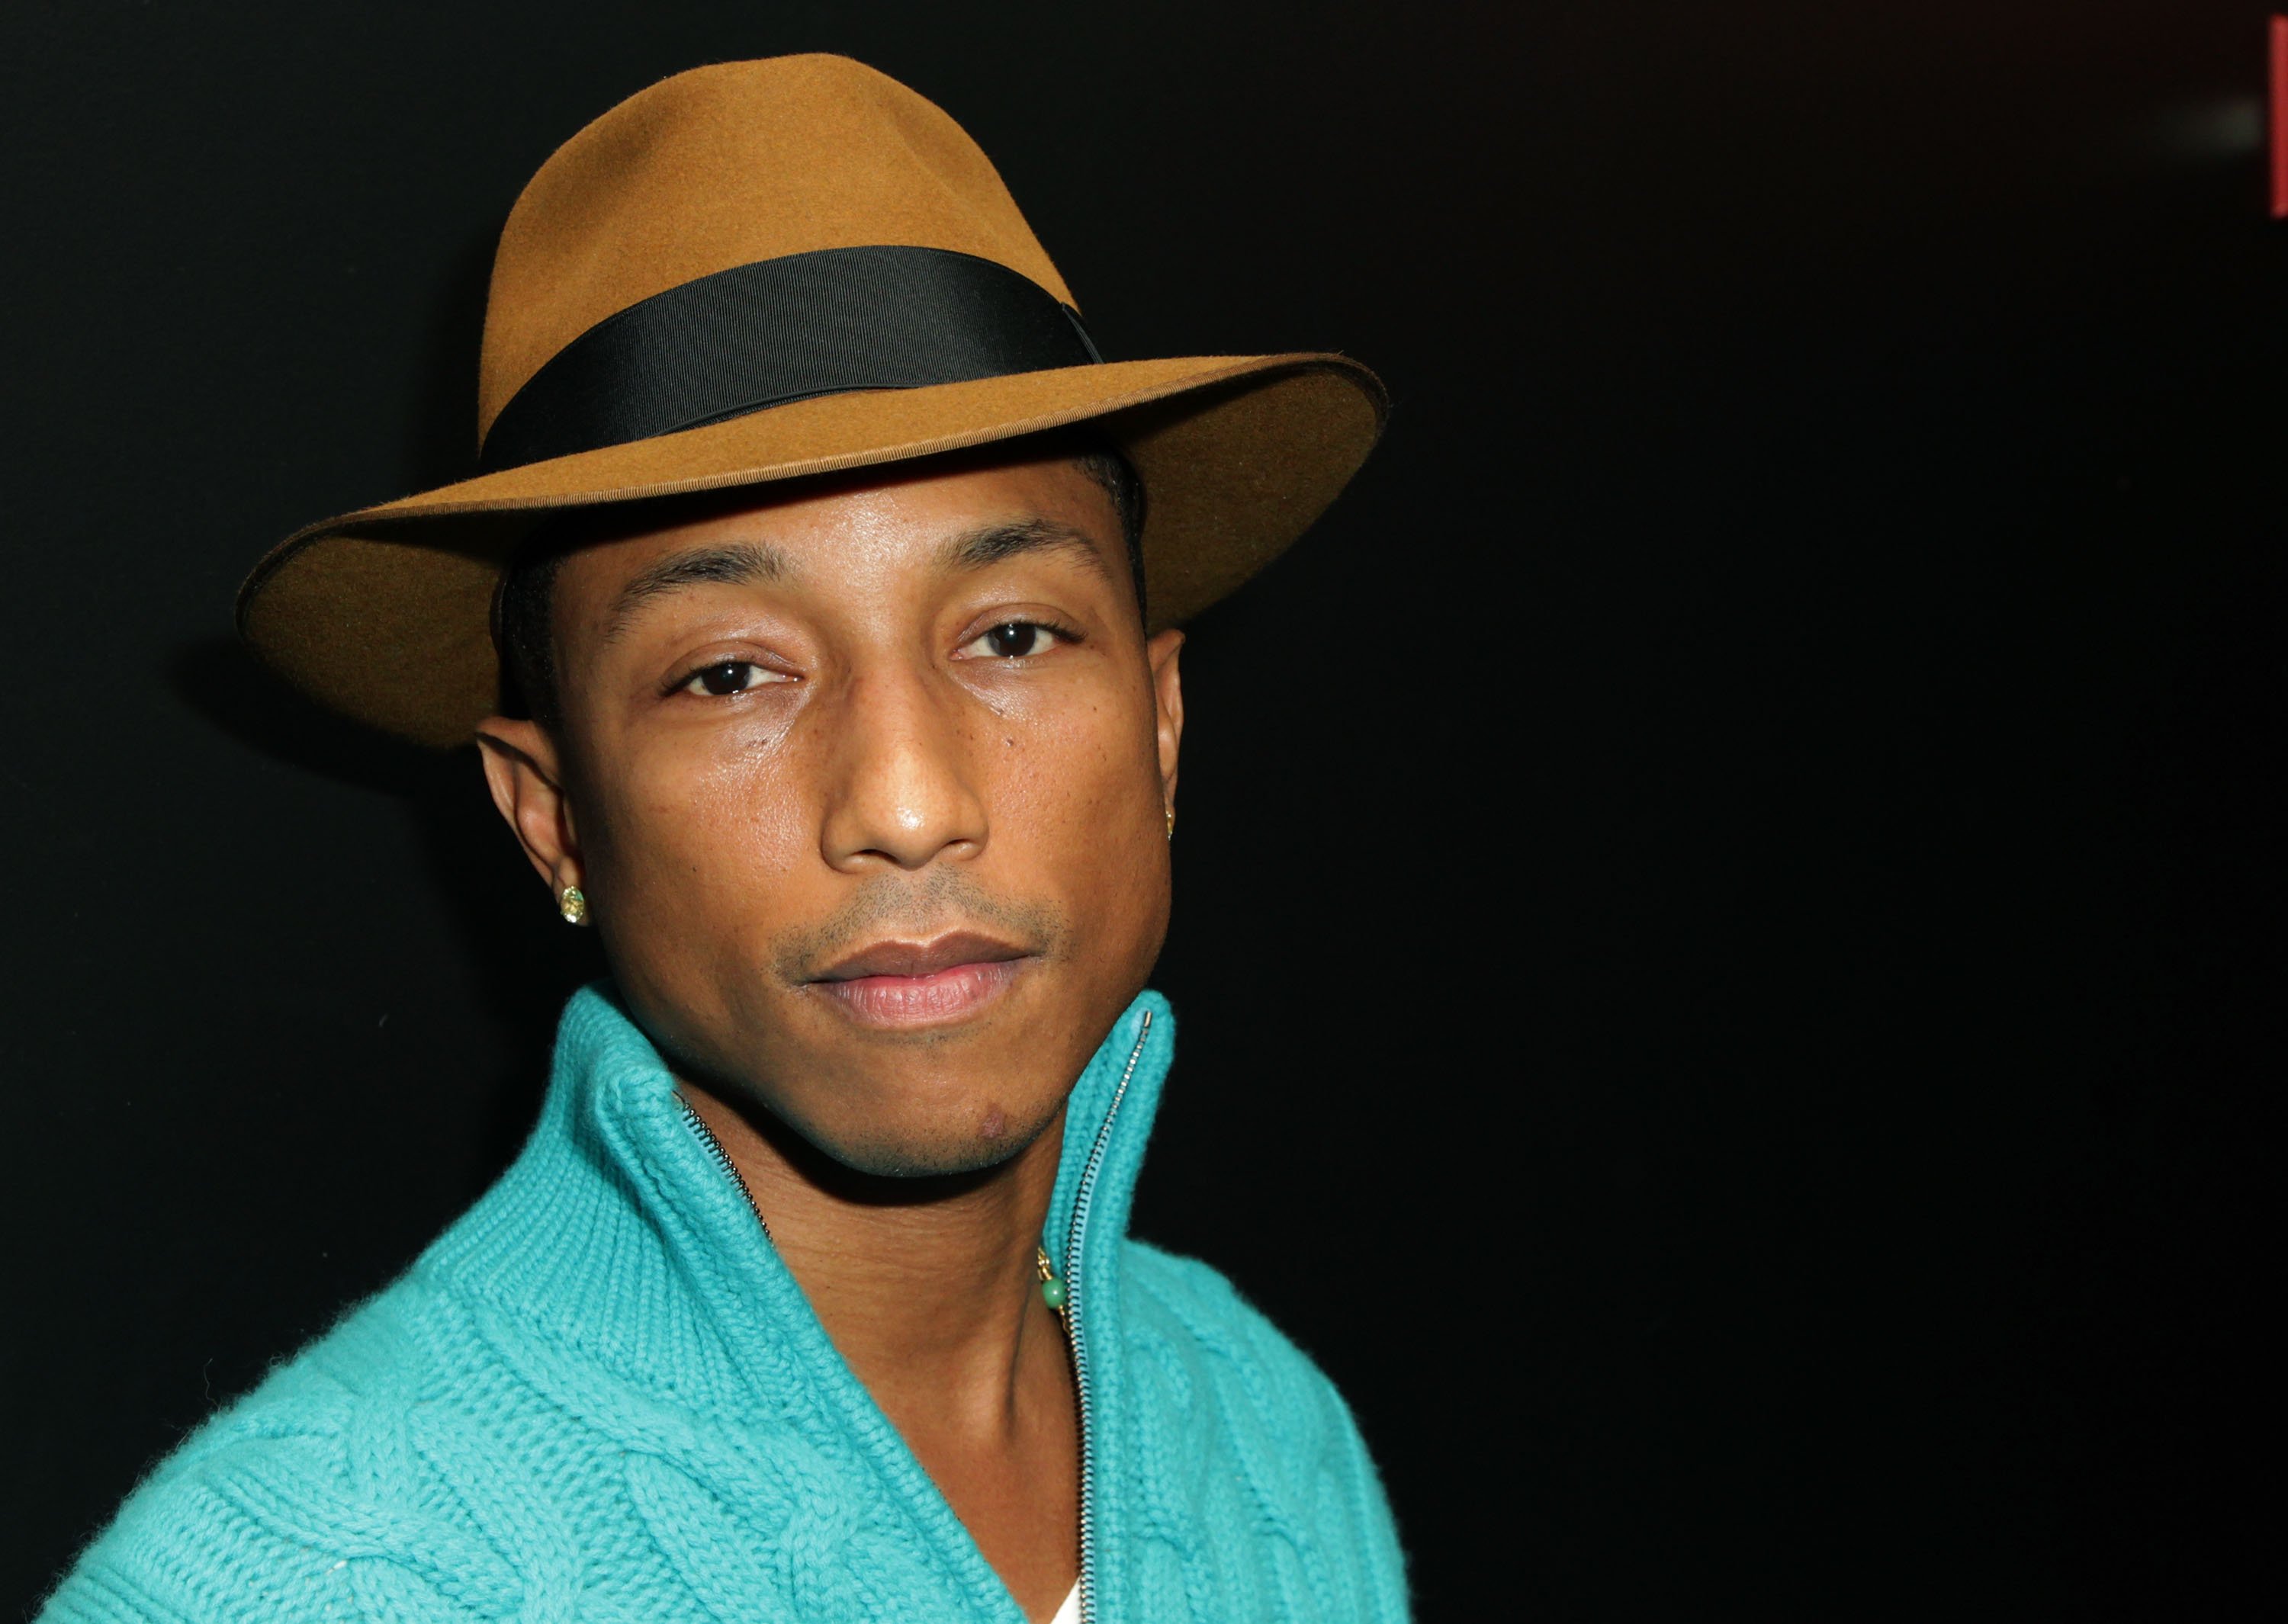 Pharrell Williams poses for a photo at an award show